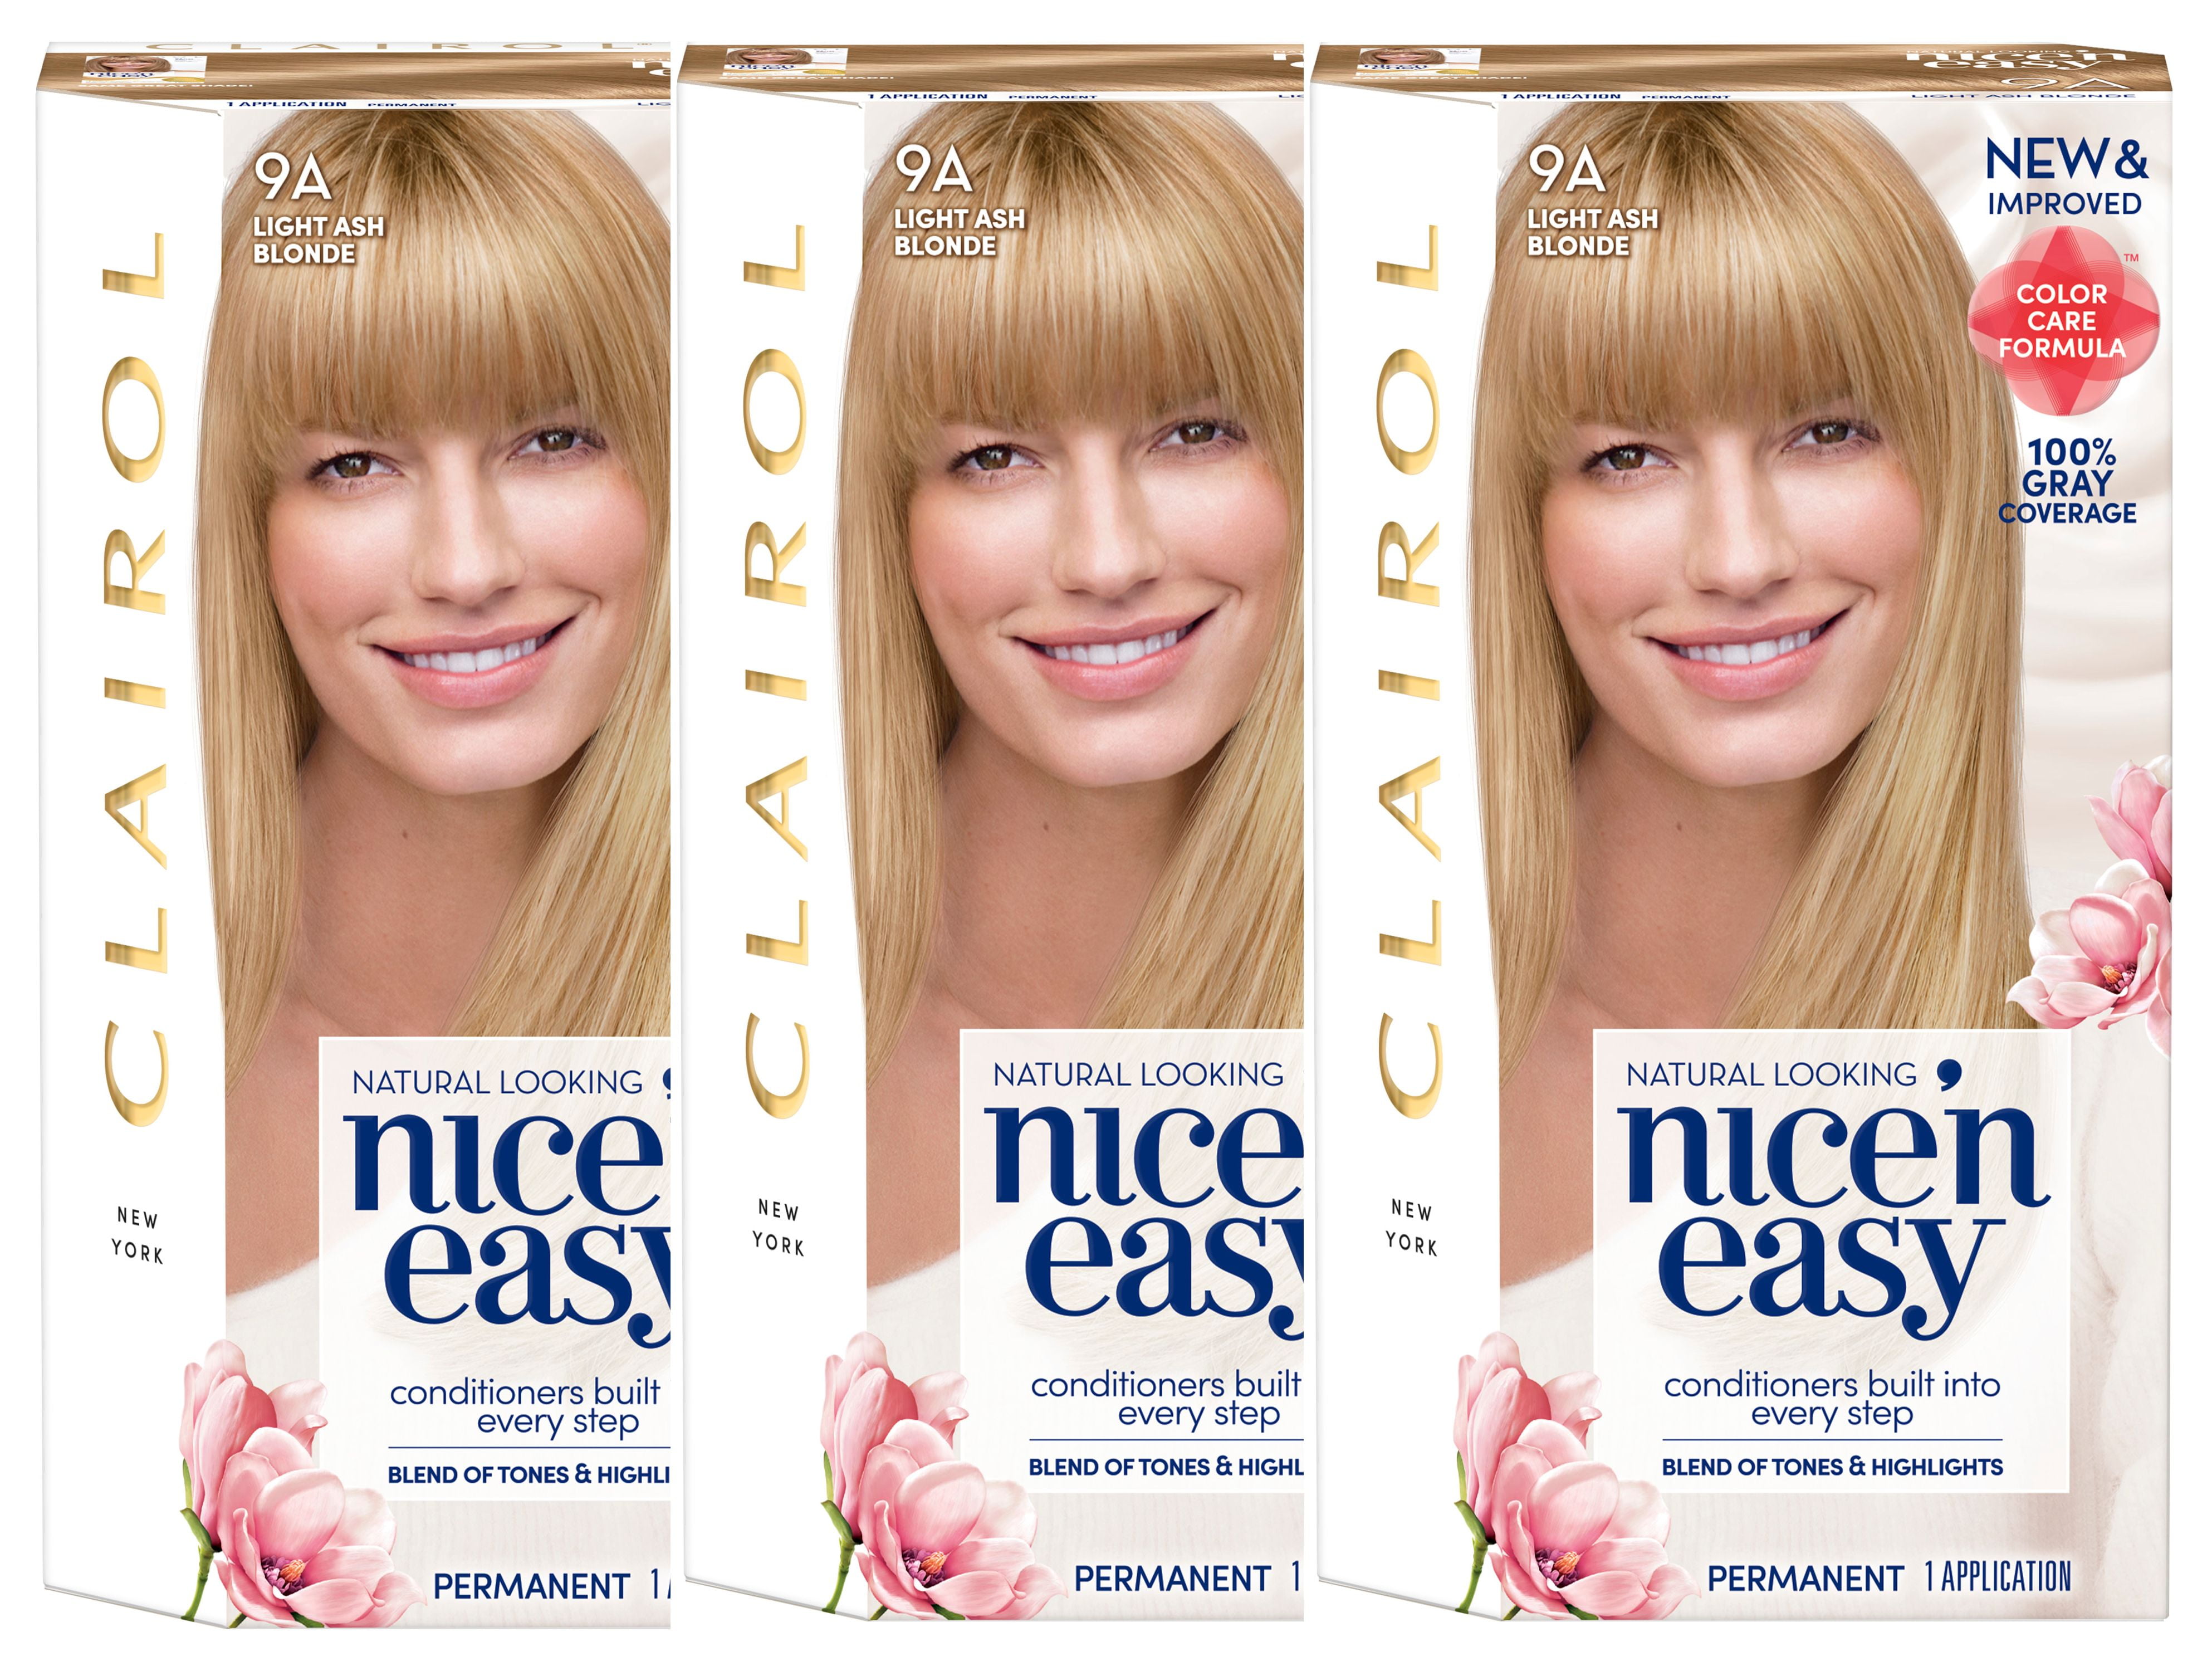 3. Clairol Nice'n Easy Permanent Hair Color, 9A Light Ash Blonde, Pack of 1 - wide 1